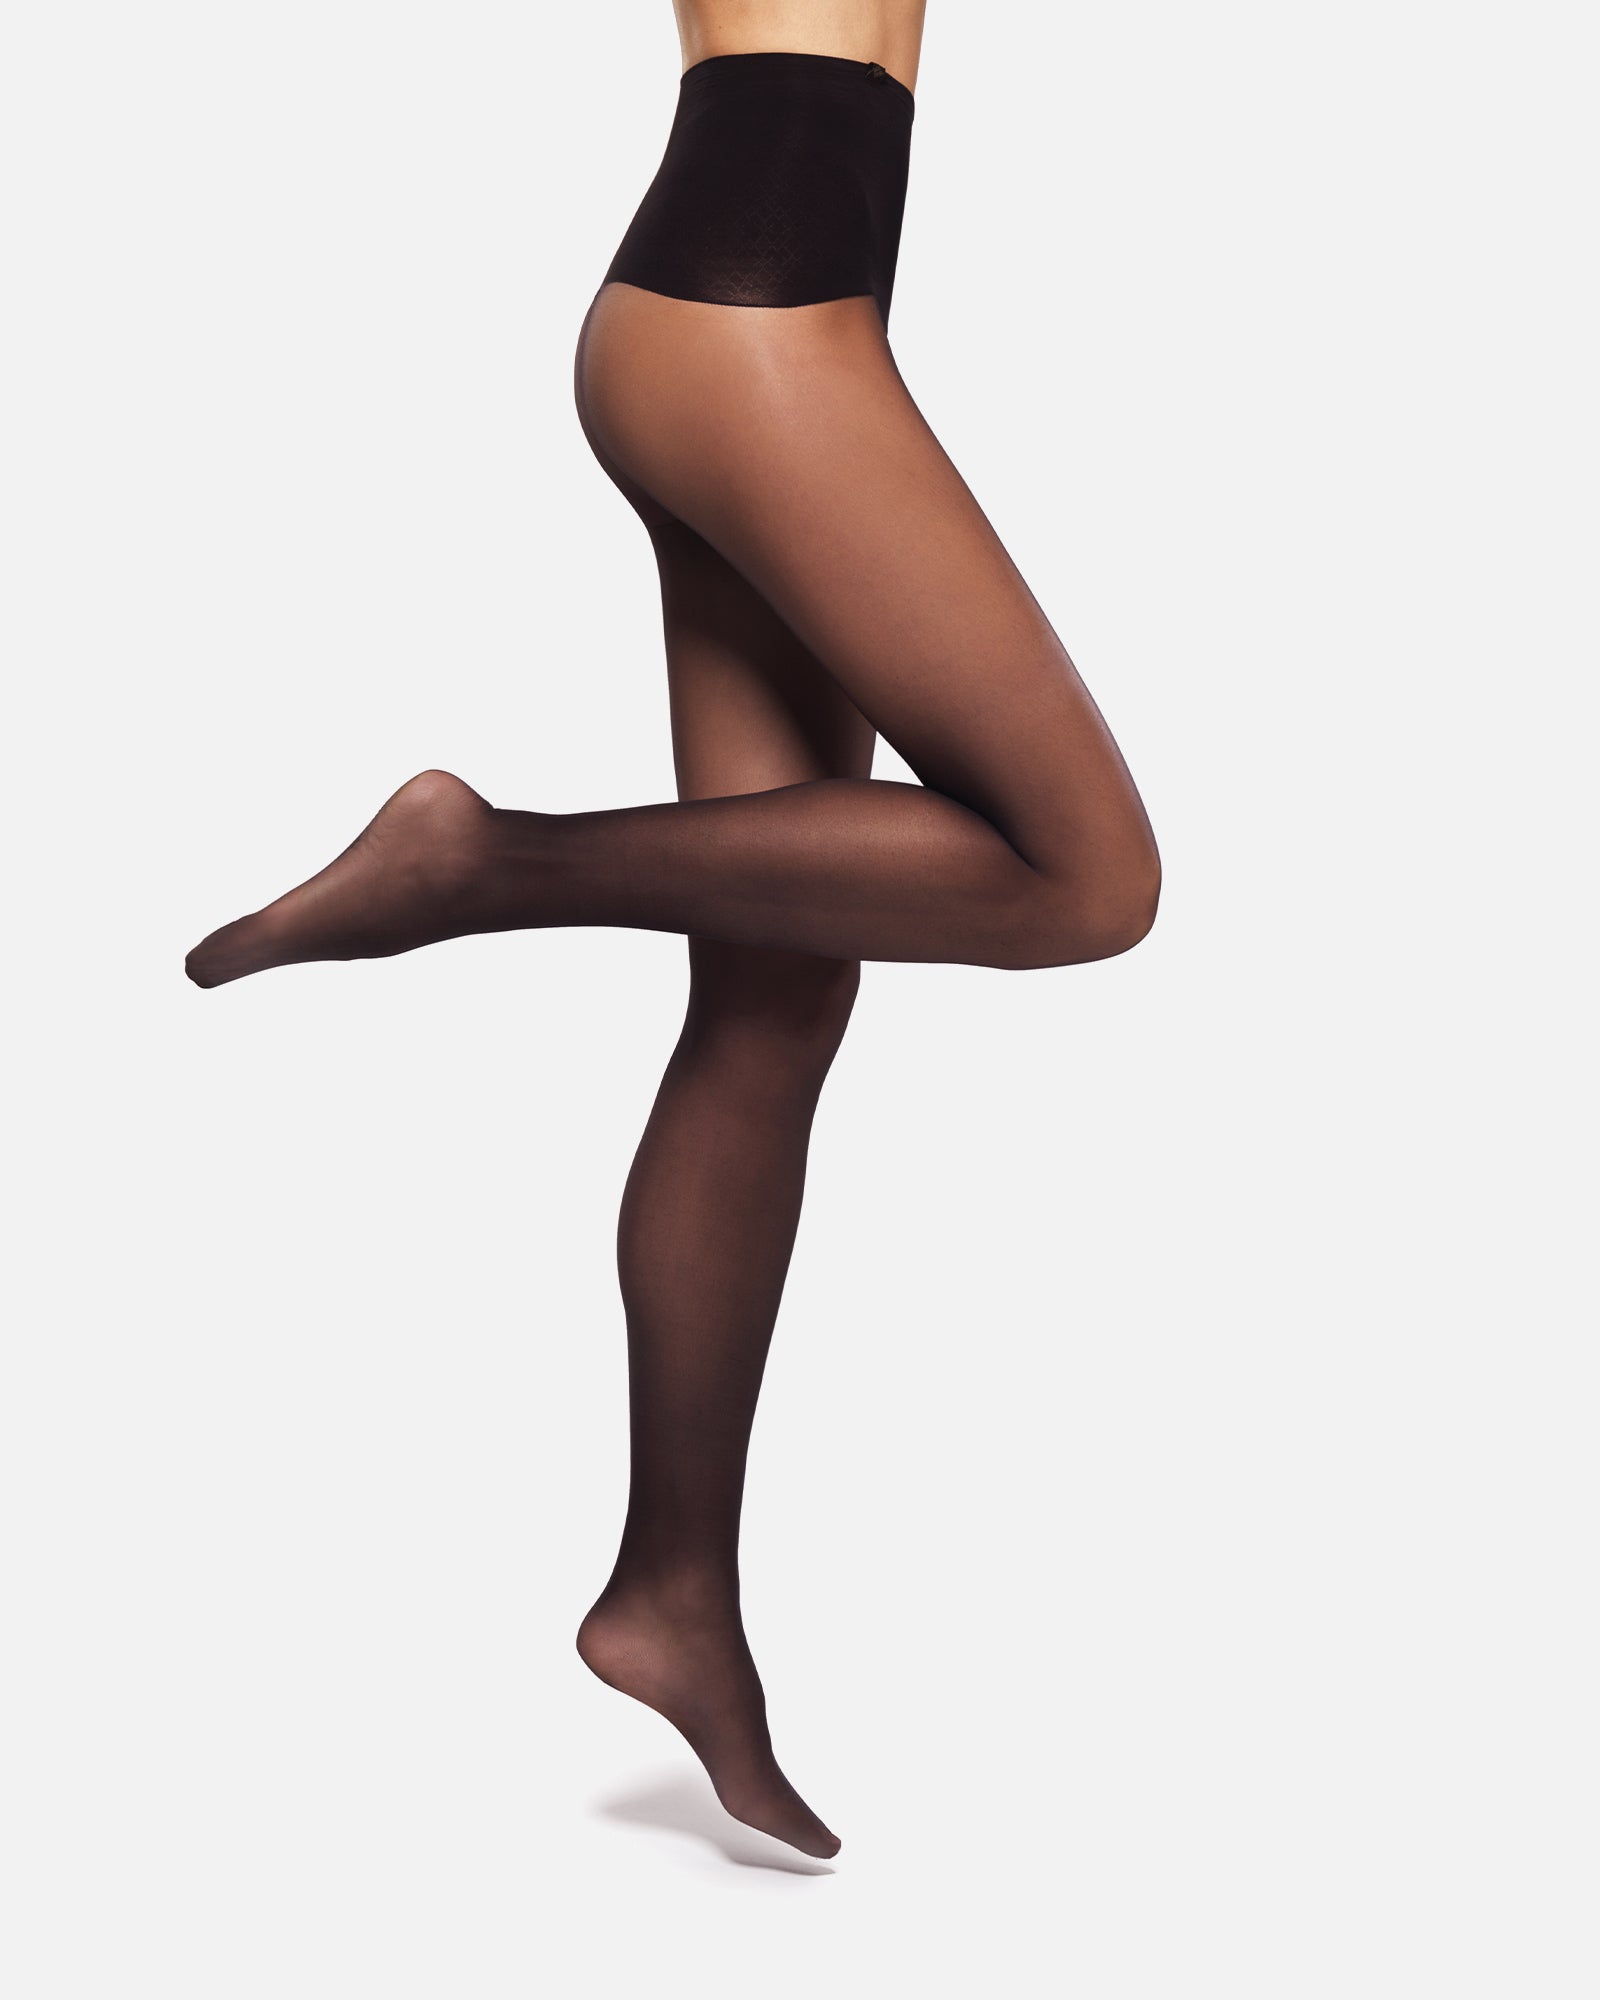 Hēdoïne releases new styles and tights bundles